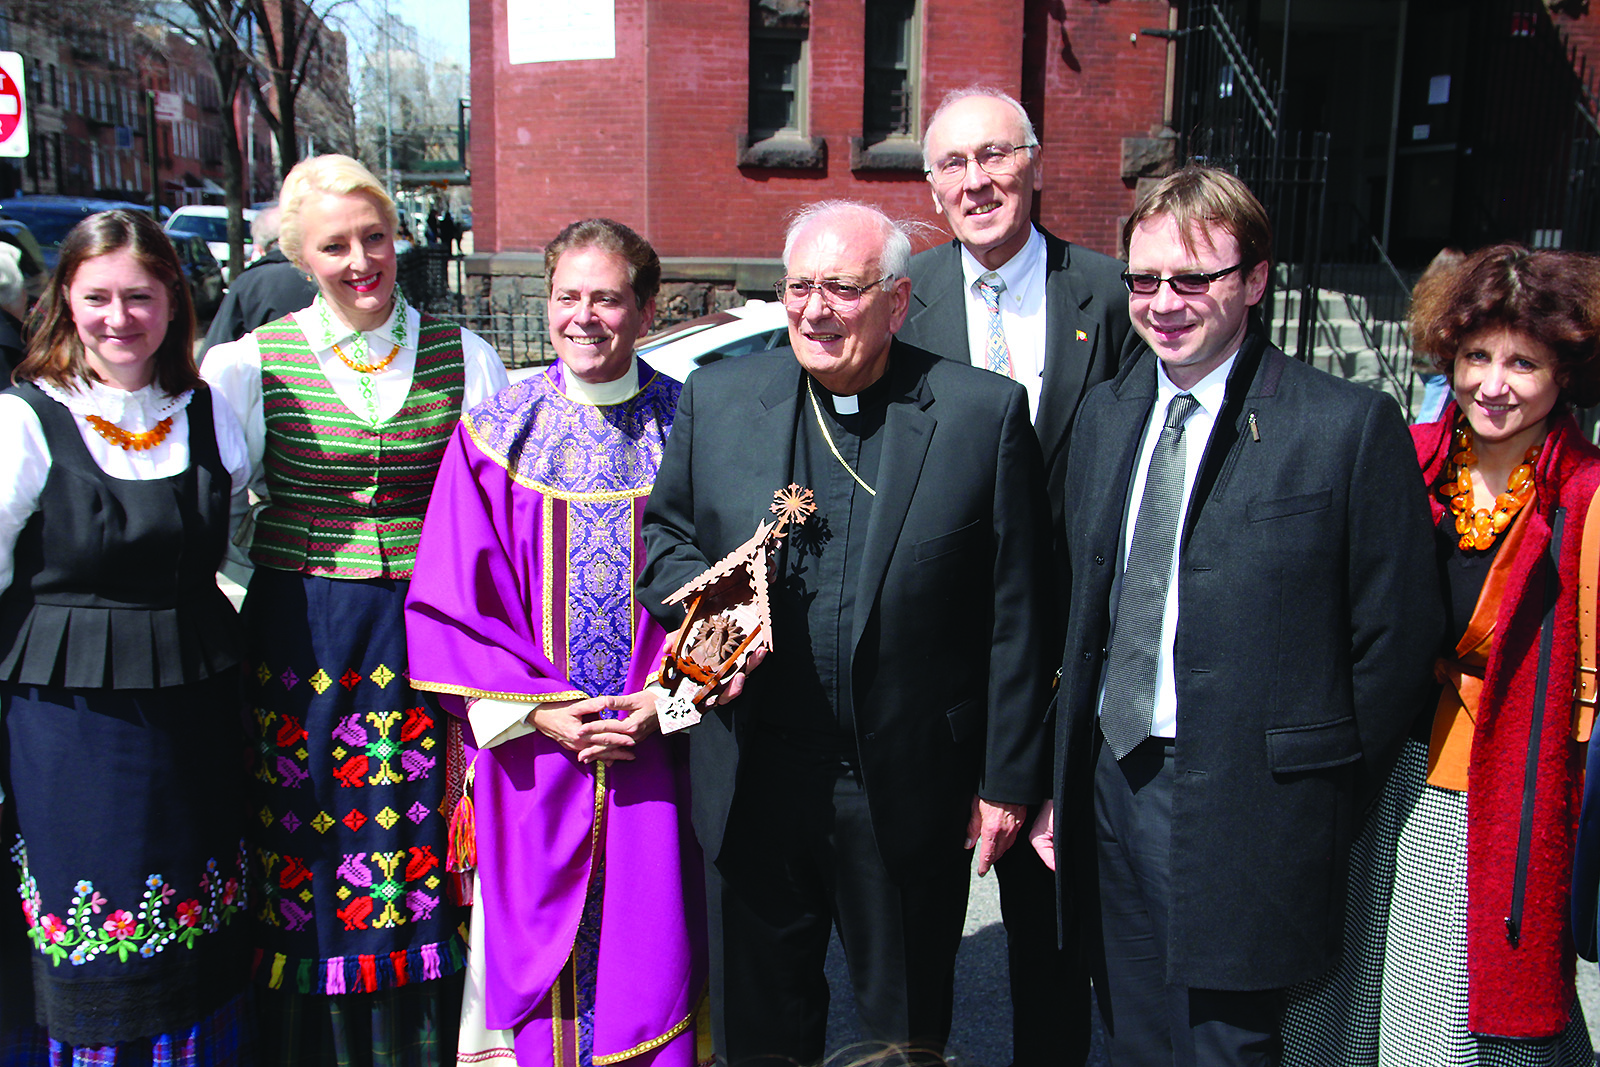 Lithuanians present a gift (Chapel of the Gates of Dawn) to Bishop Nicholas DiMarzio of Brooklyn. From left to right: Gitana Skripkaitė, Acting Chairman of the Consulate General of the Republic of Lithuania in New York; Rasa Sprindys, Chairman of the Lithuanian Community of New York; Msgr. Jamie Gigantiello, Pastor of Annunciation parish; Bishop Nicholas DiMarzio of Brooklyn; Raimundas Šližys;, Rolandas Kriščiūnas, the Ambassador of the Republic of Lithuania to the US; and Ambassador Audra Plepytė, Permanent Representative of Lithuania to the UN.